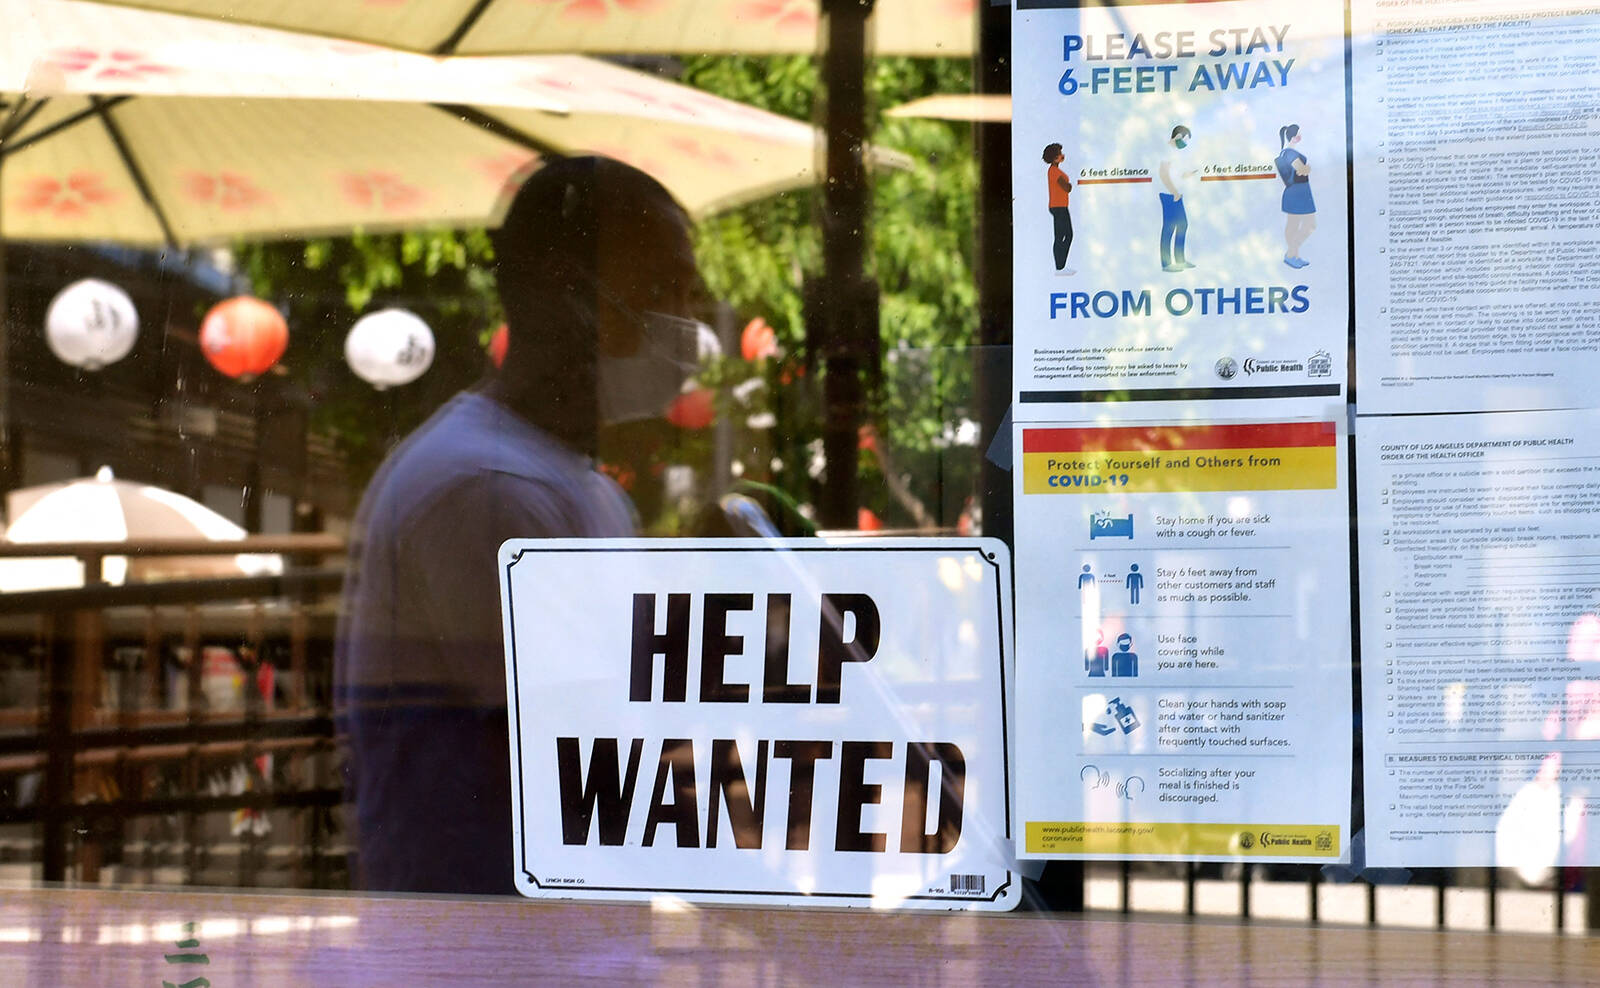 Frederic J. Brown | AFP | Getty Images
A “Help Wanted” sign is posted beside coronavirus safety guidelines in front of a restaurant in Los Angeles on May 28, 2021.